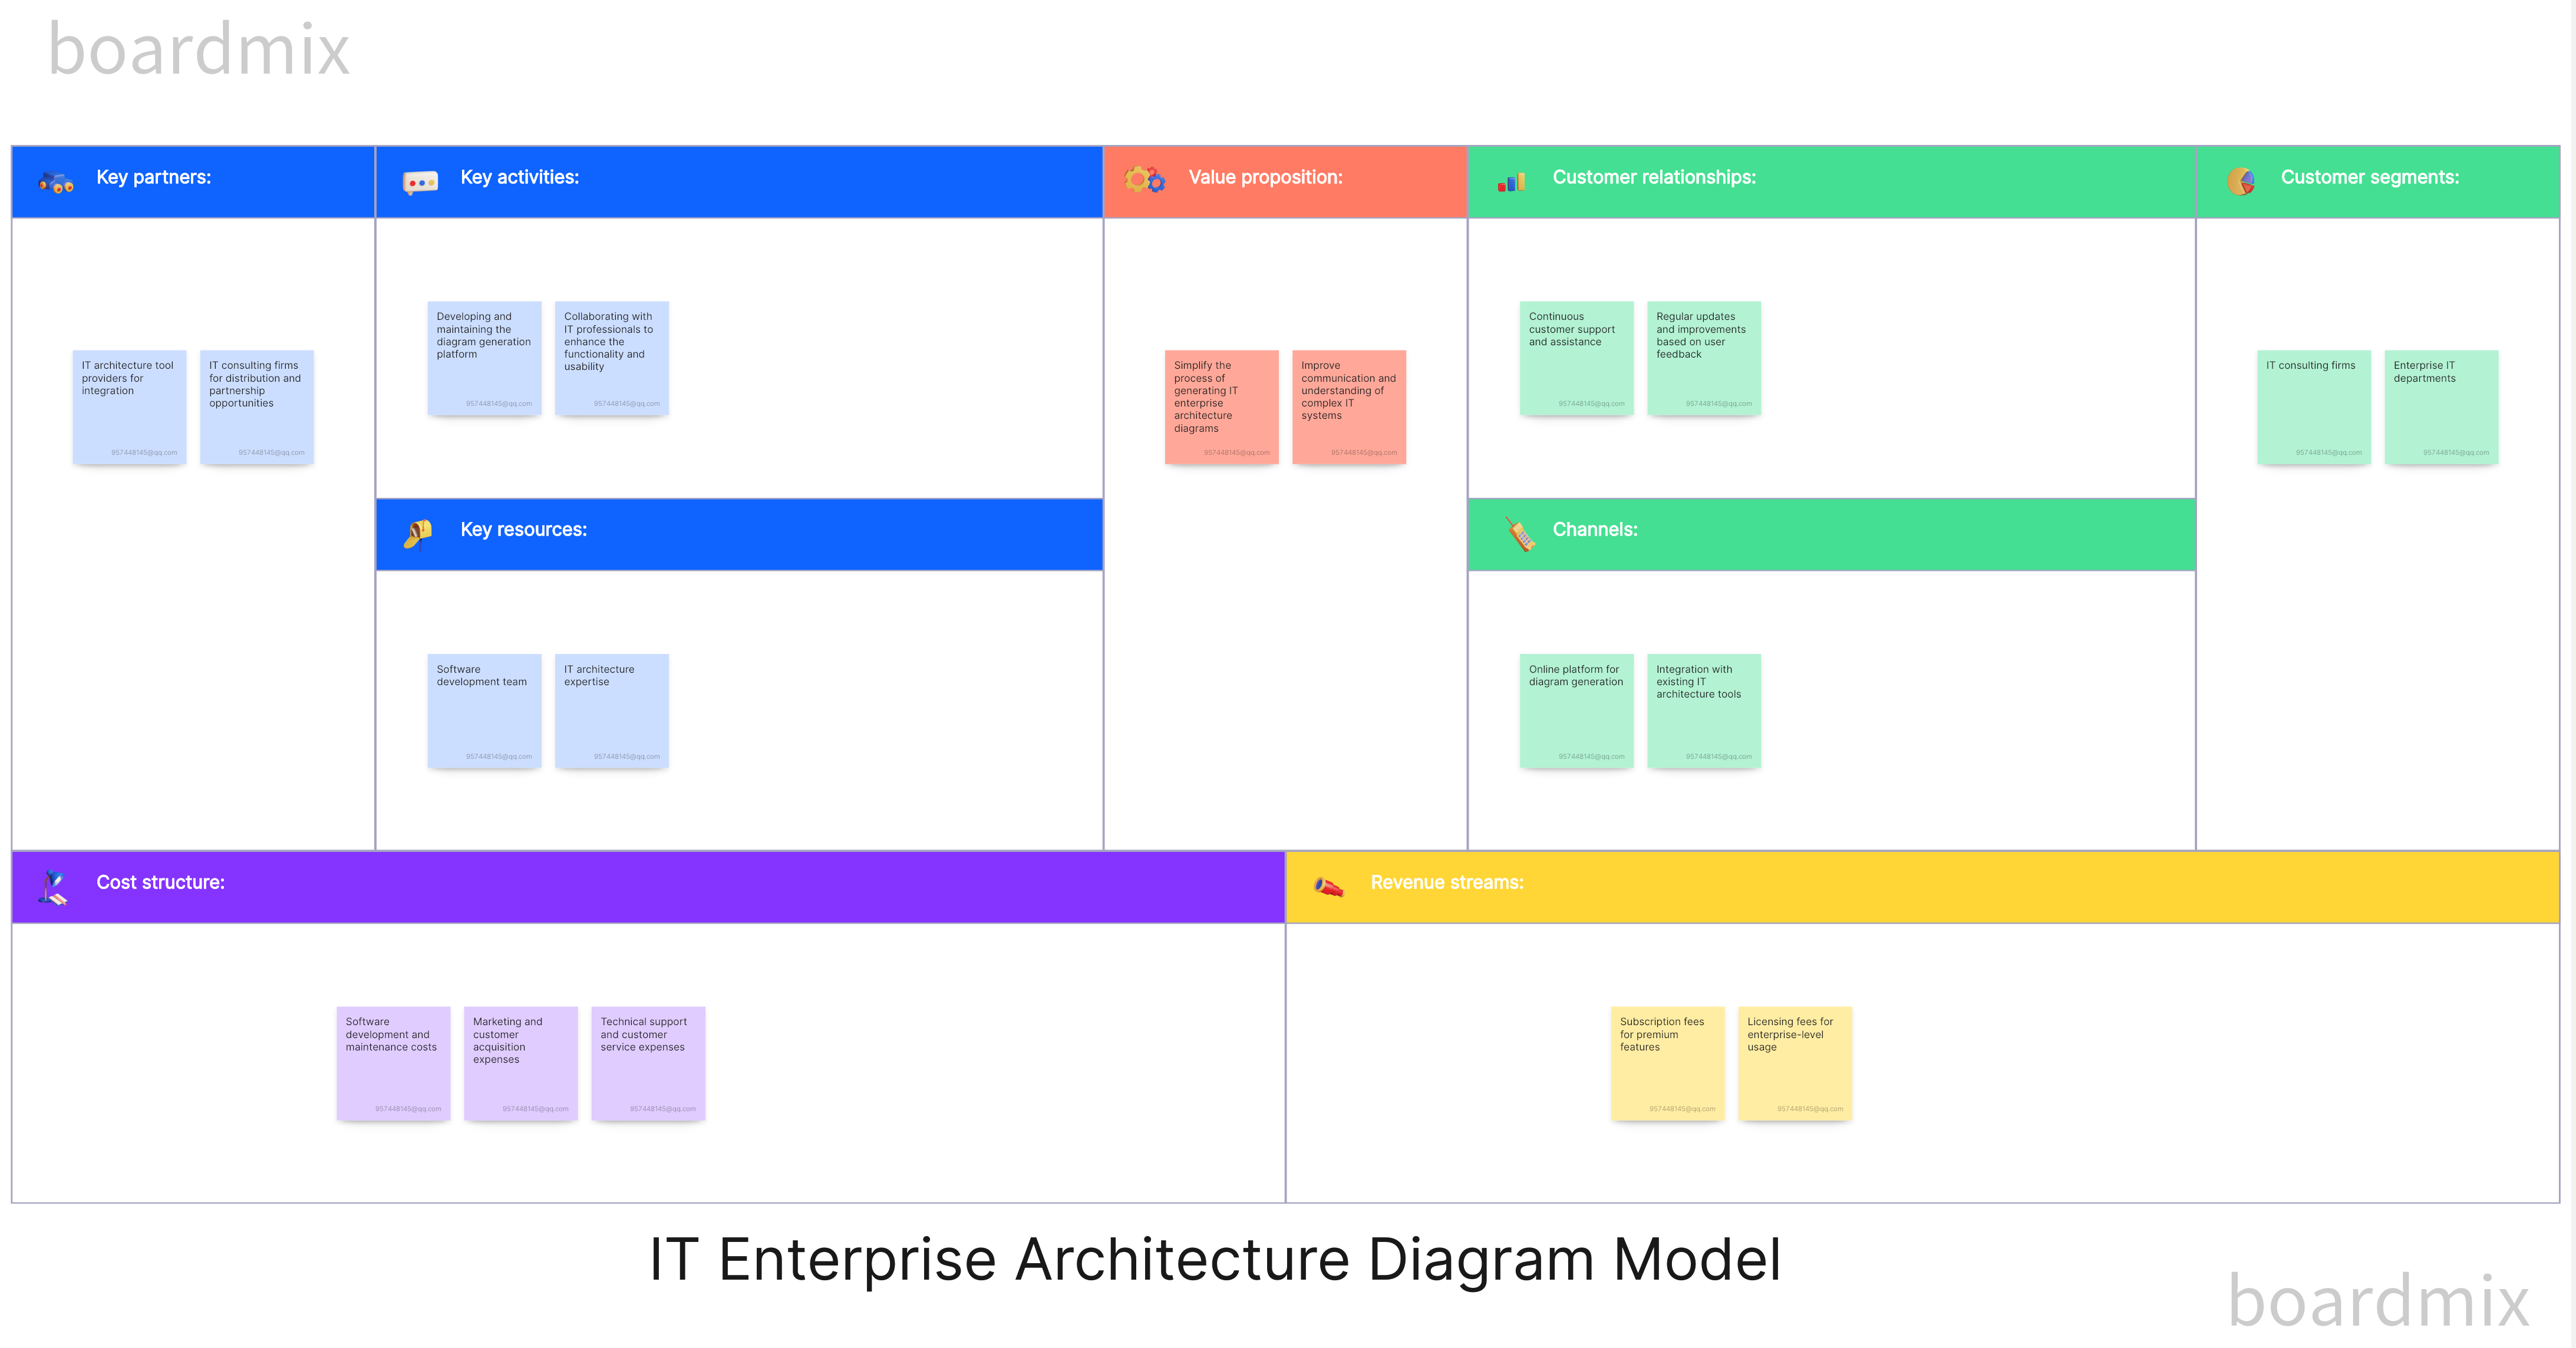 How to Build an Enterprise Architecture Diagram for Your Organization